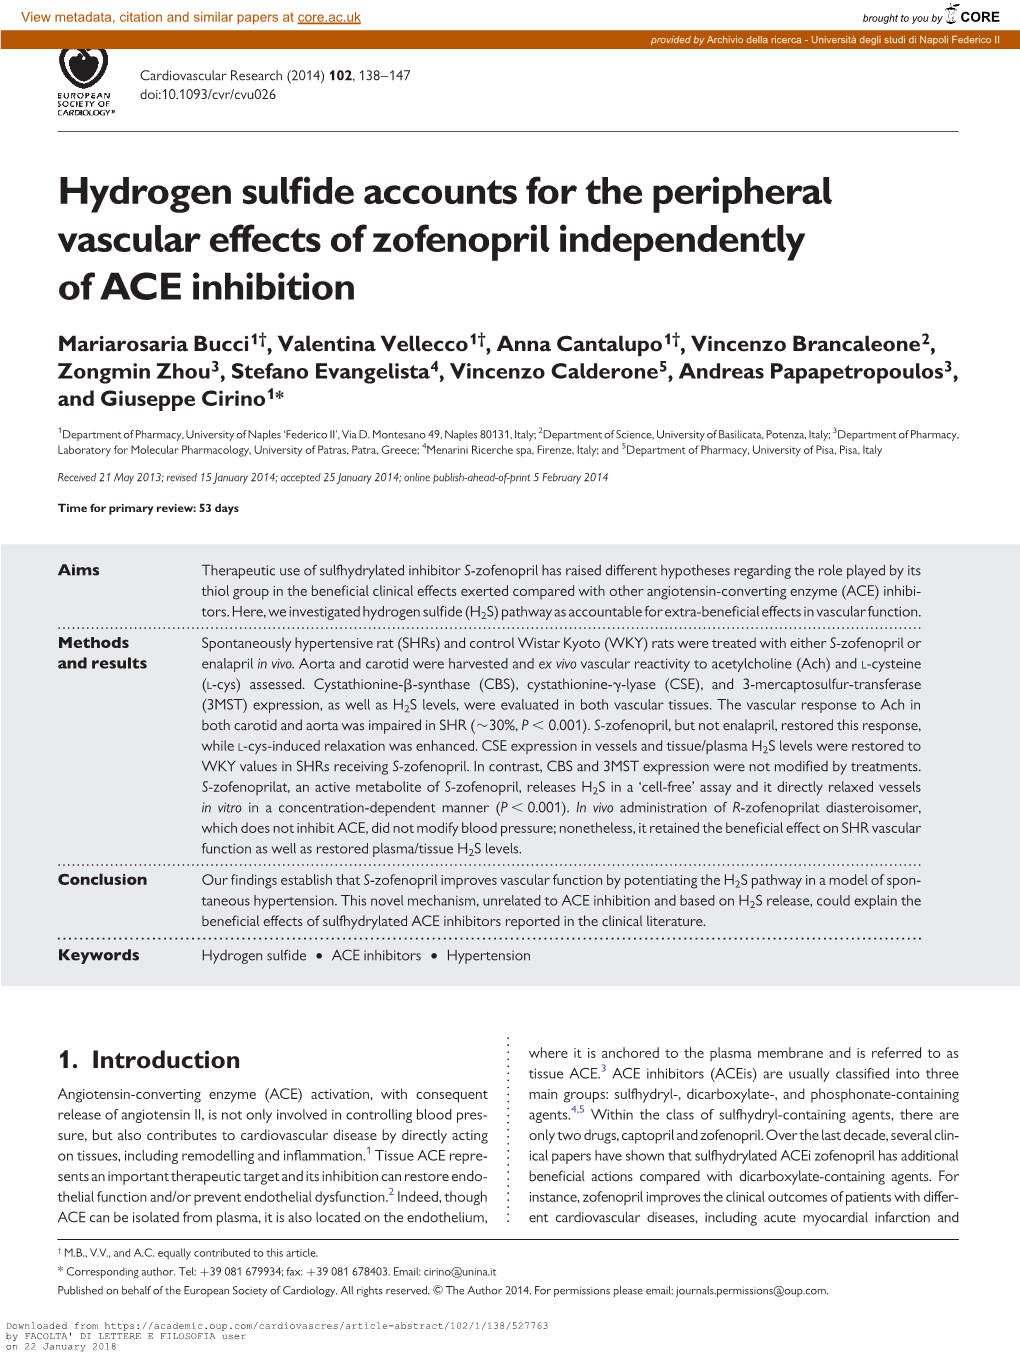 Hydrogen Sulfide Accounts for the Peripheral Vascular Effects of Zofenopril Independently of ACE Inhibition